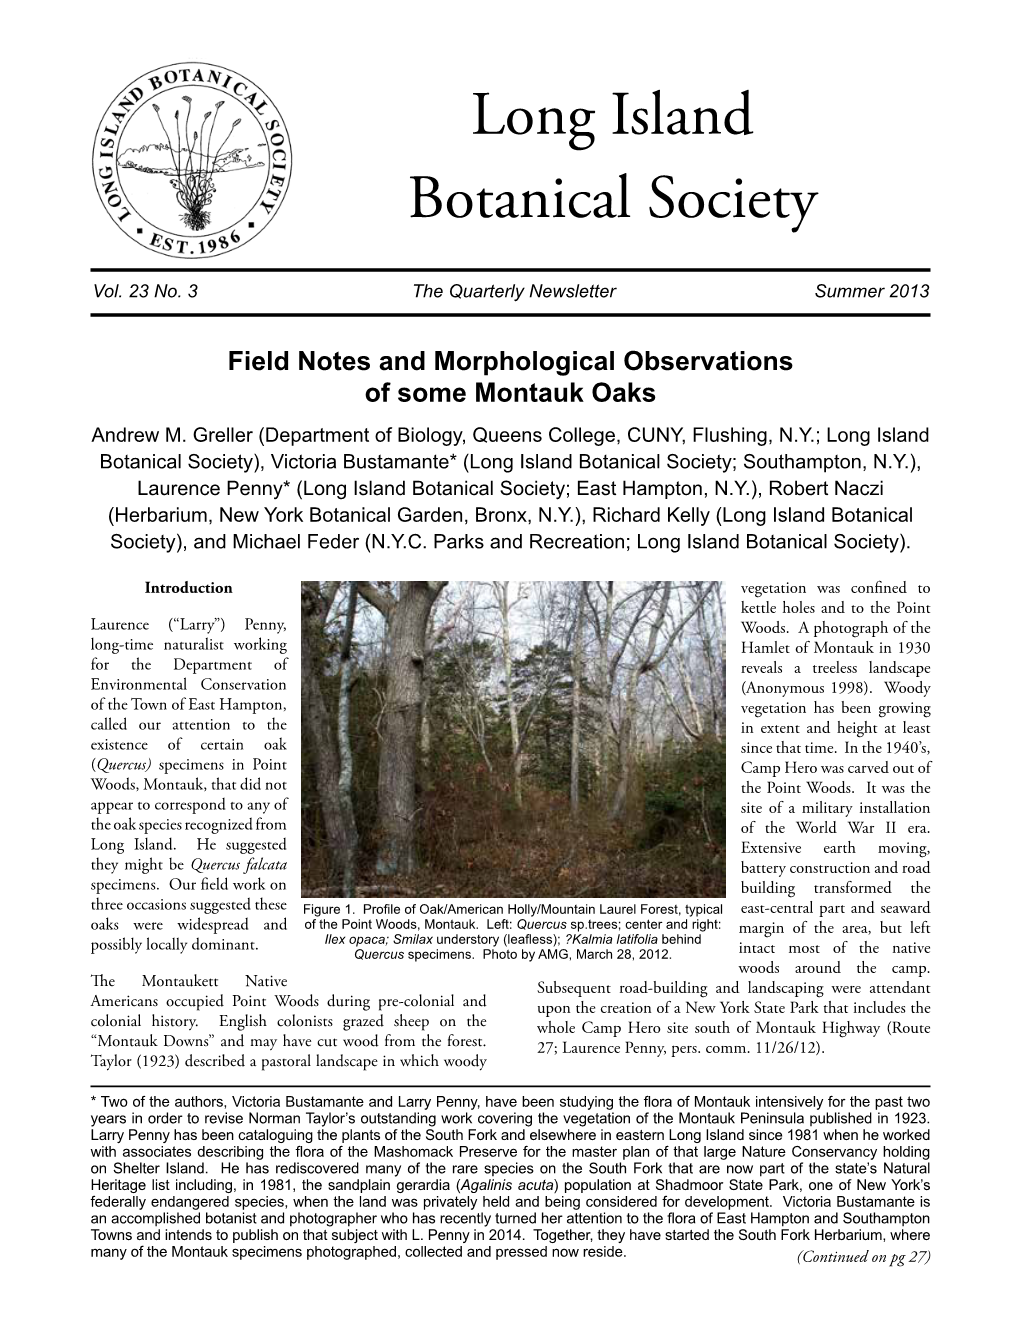 Field Notes and Morphological Observations of Some Montauk Oaks Andrew M